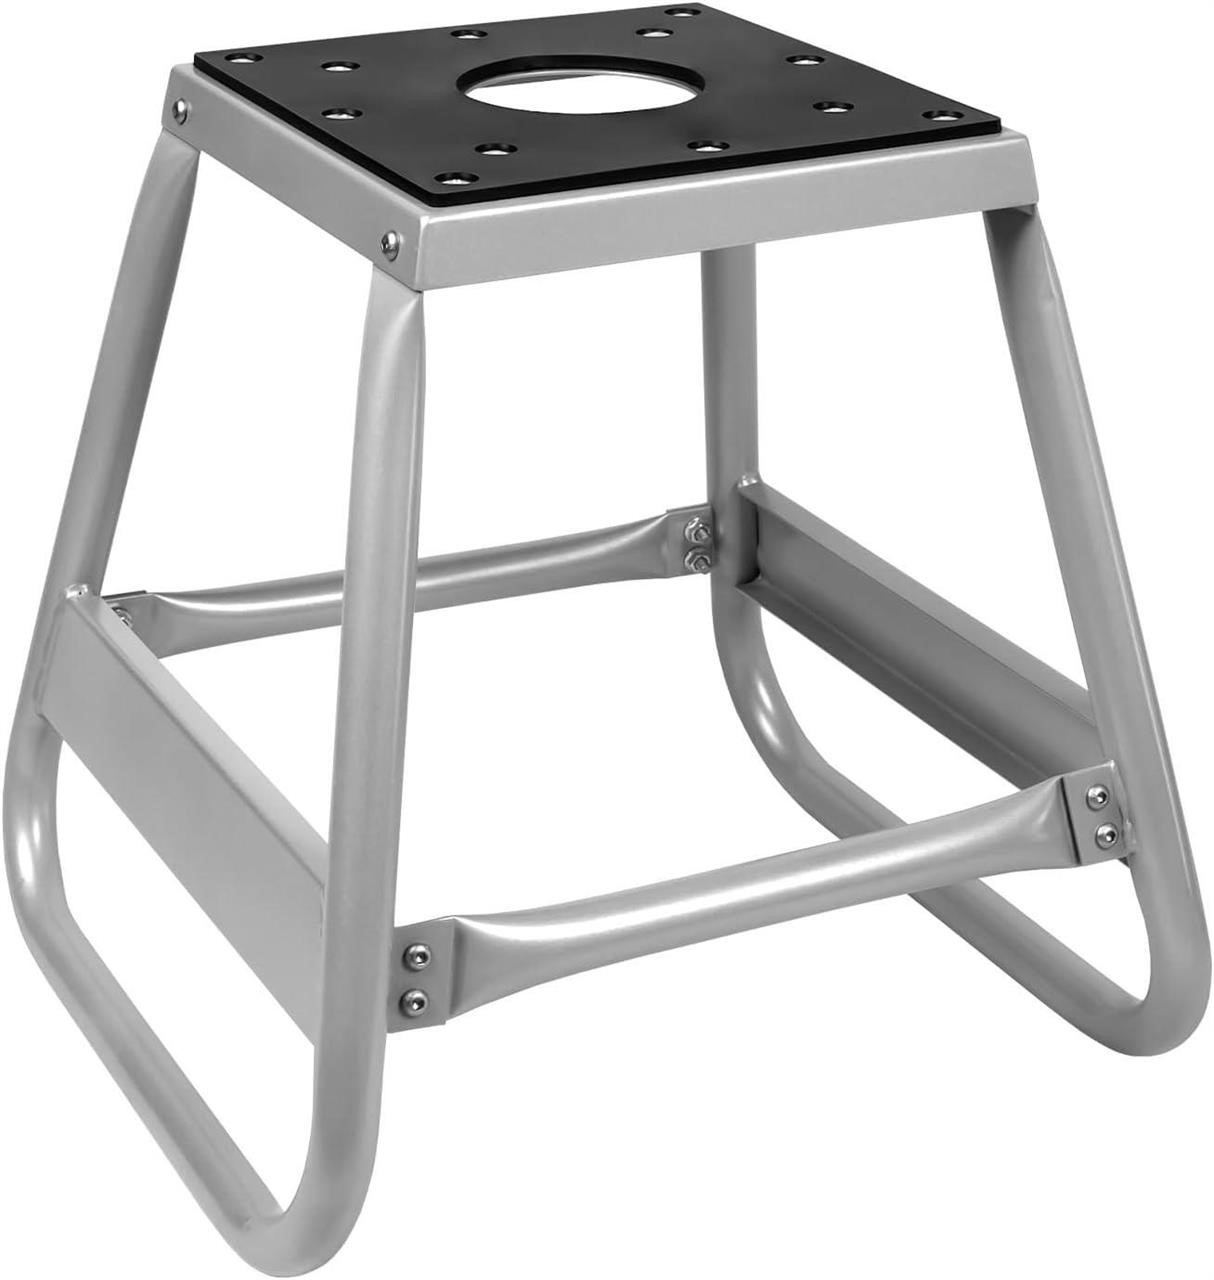 AS IS-1100LB Moto Lift Stand - Silver